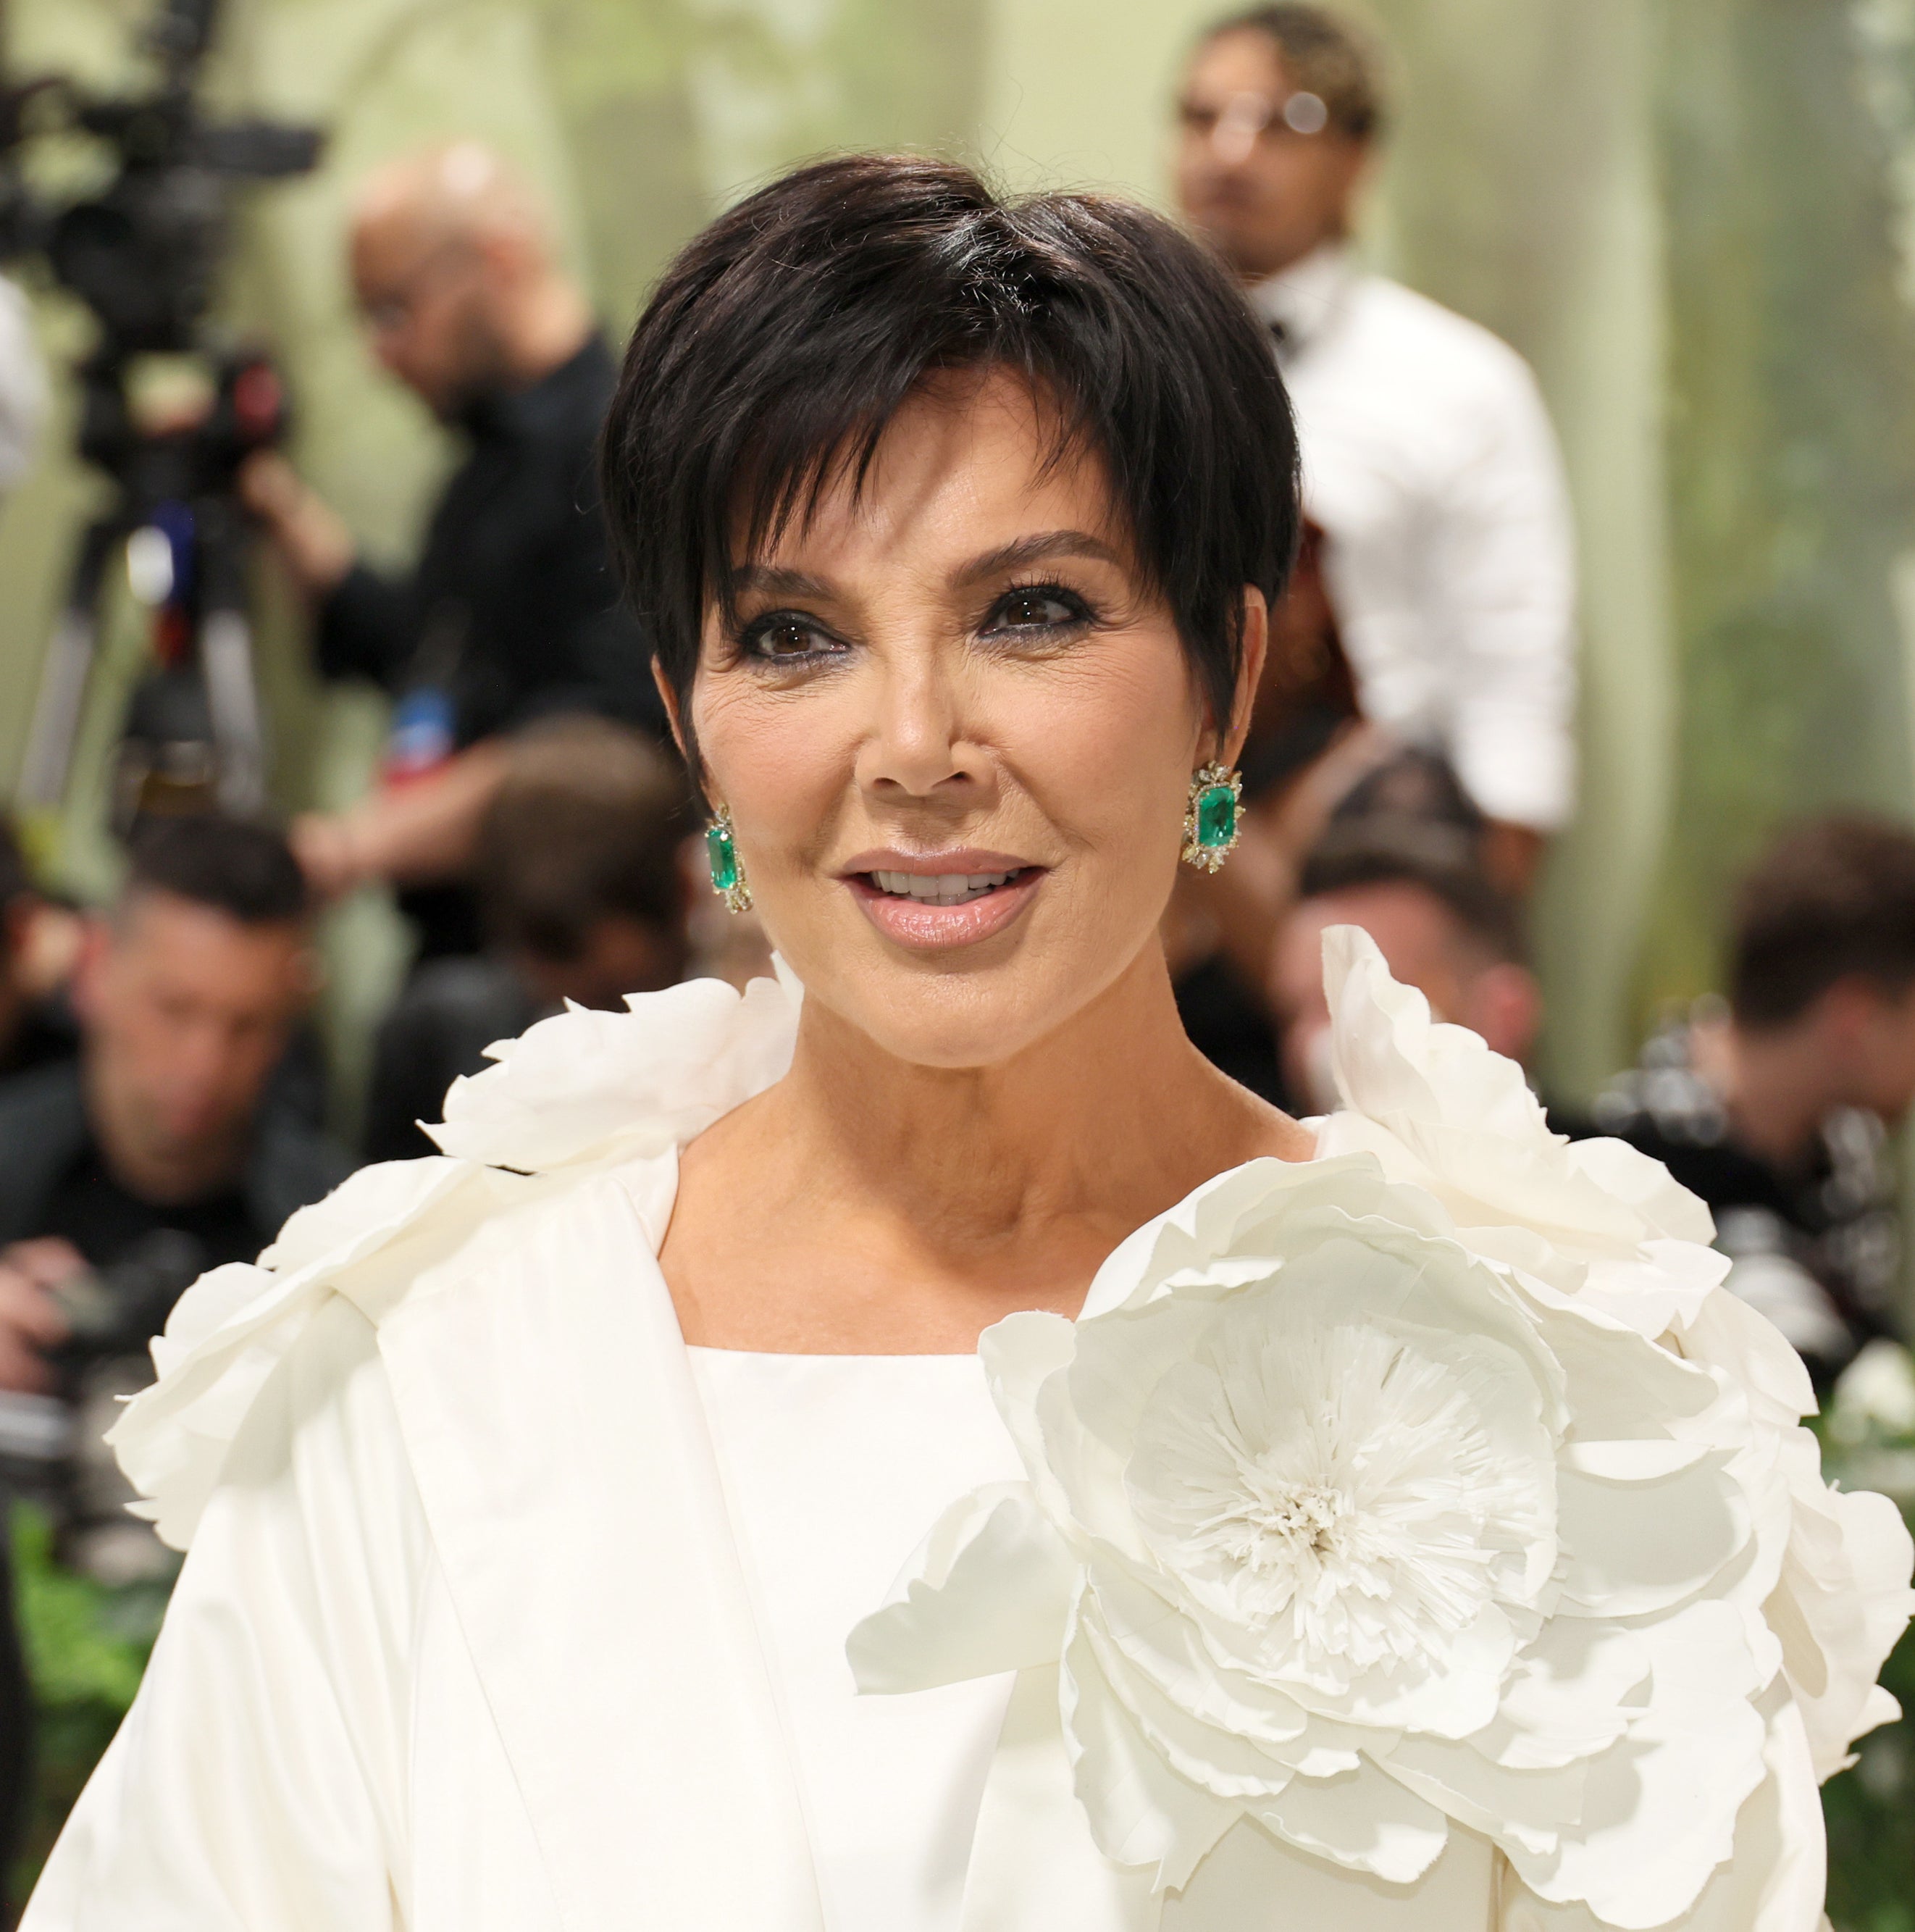 Kris Jenner stands on a red carpet, wearing an outfit adorned with a large floral design on her shoulder